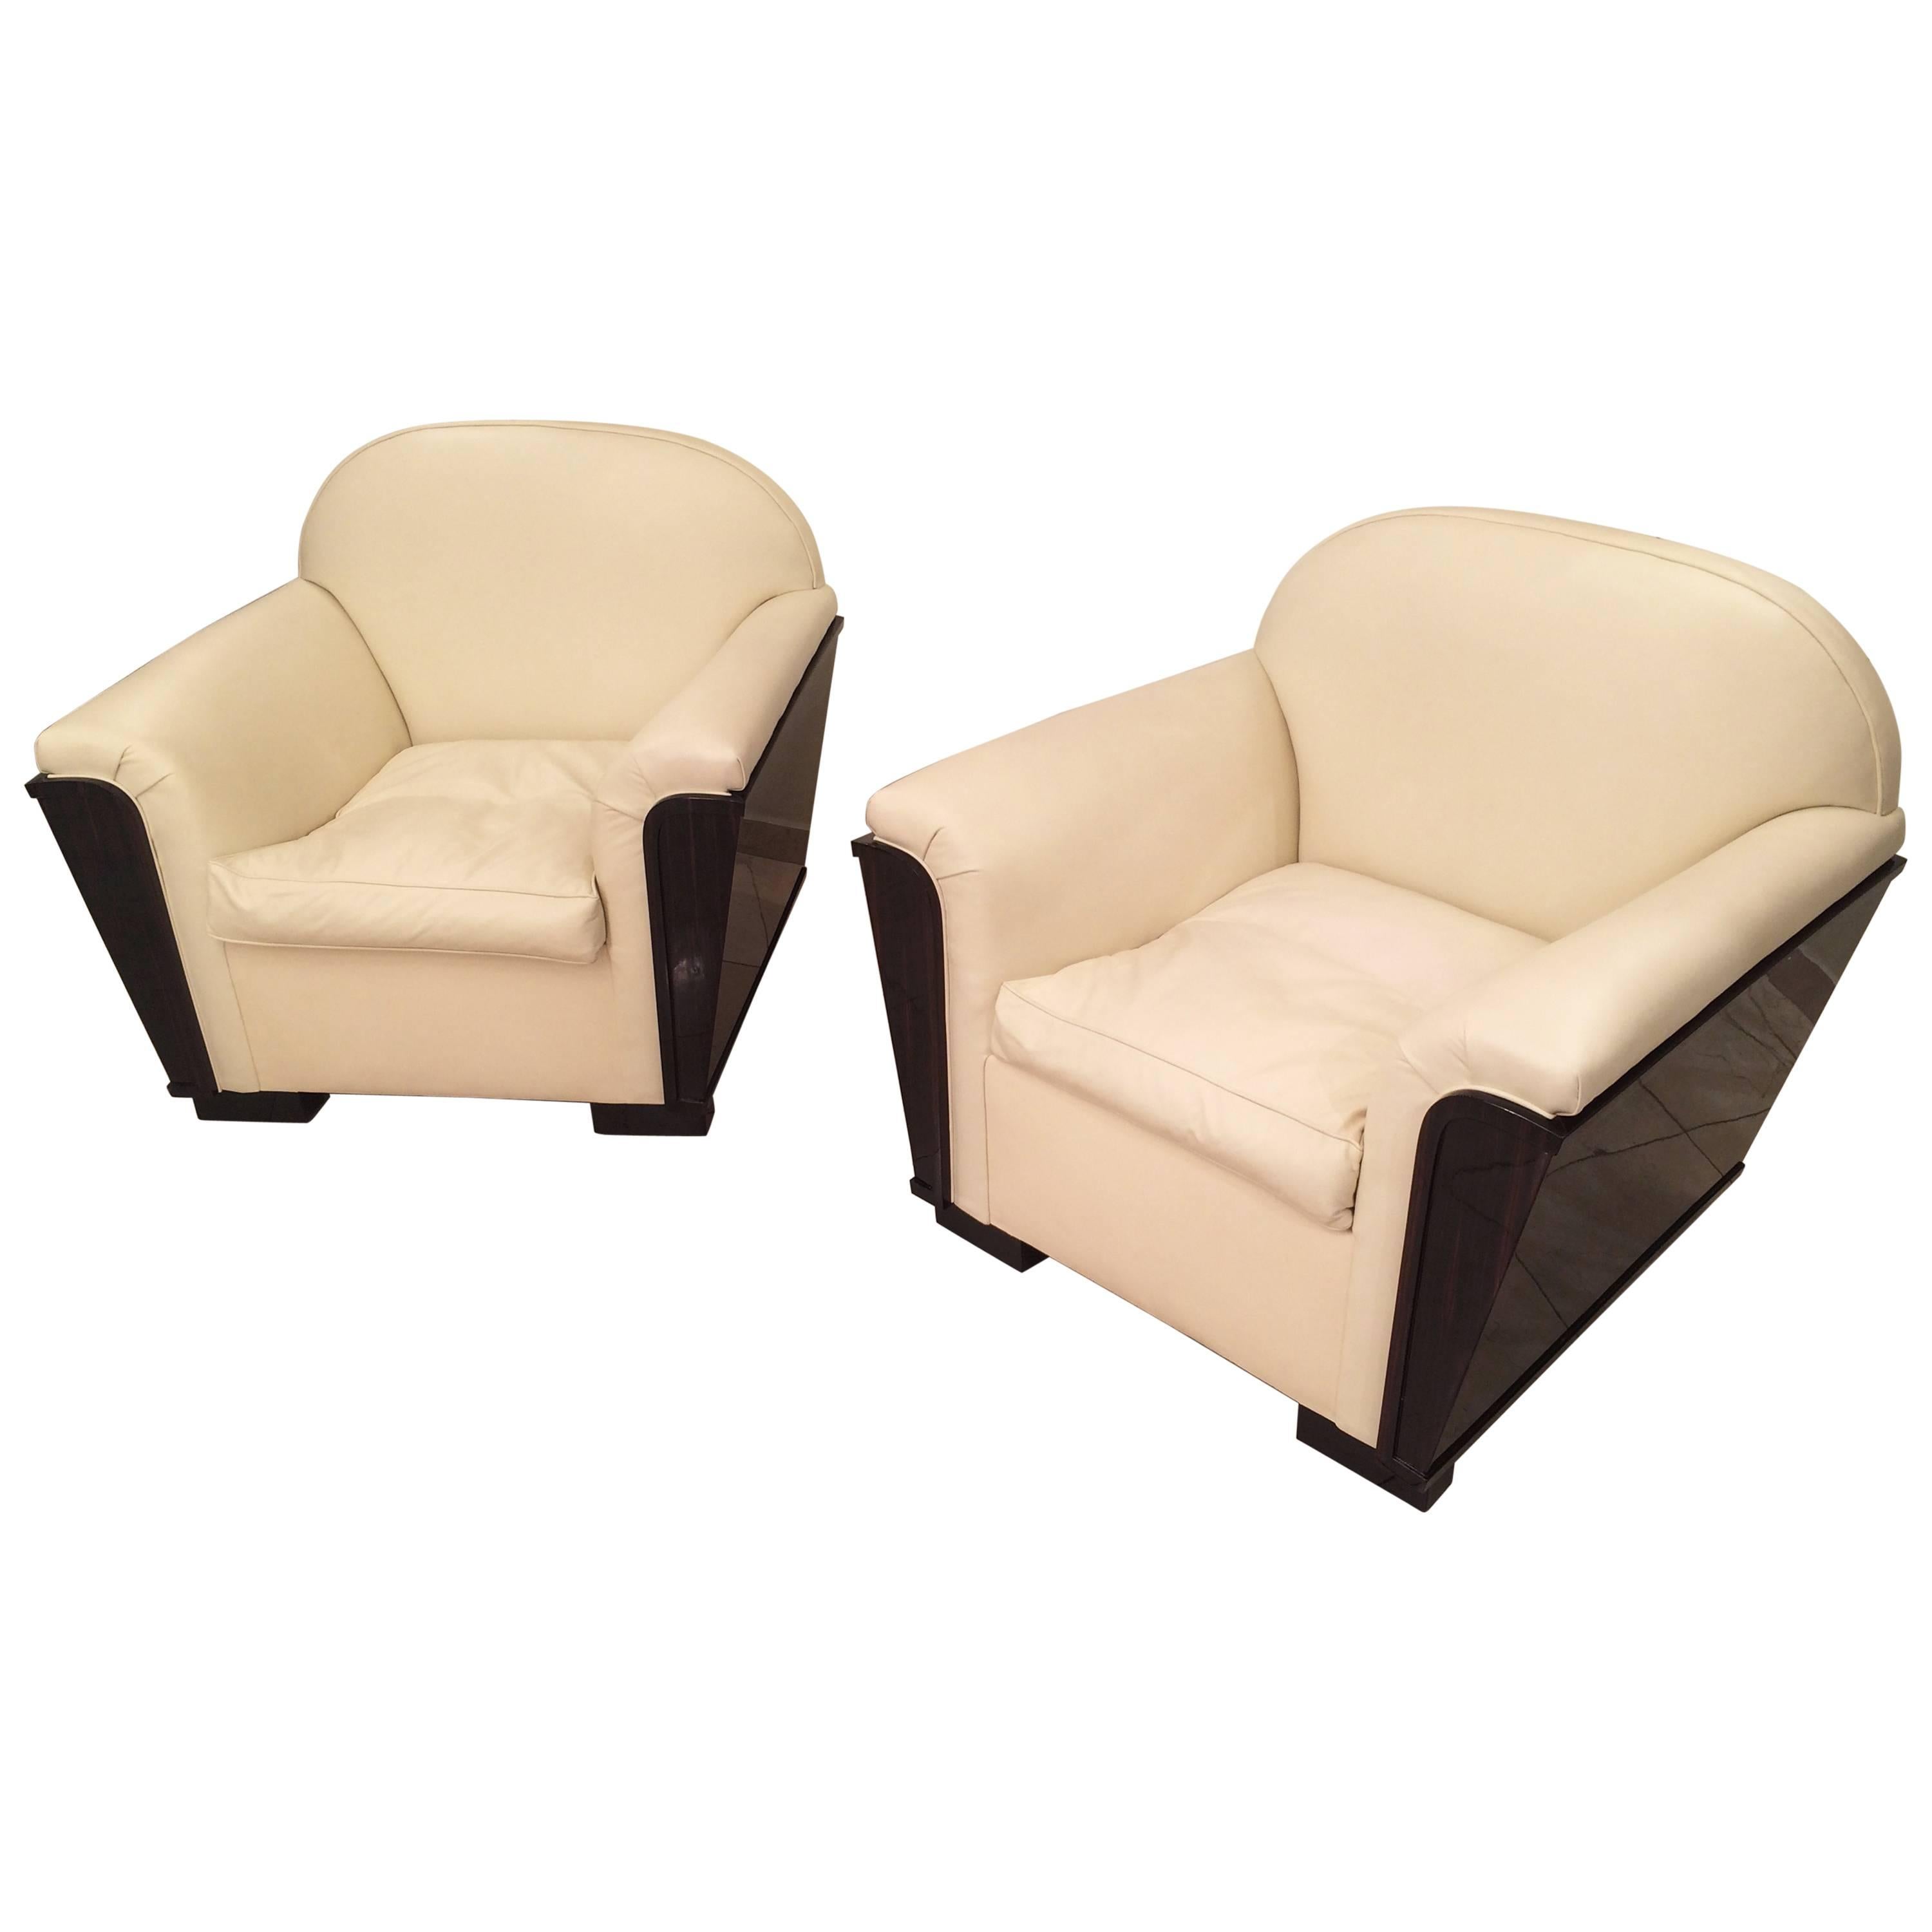 Pair of French Art Deco Macassar Club Armchairs For Sale